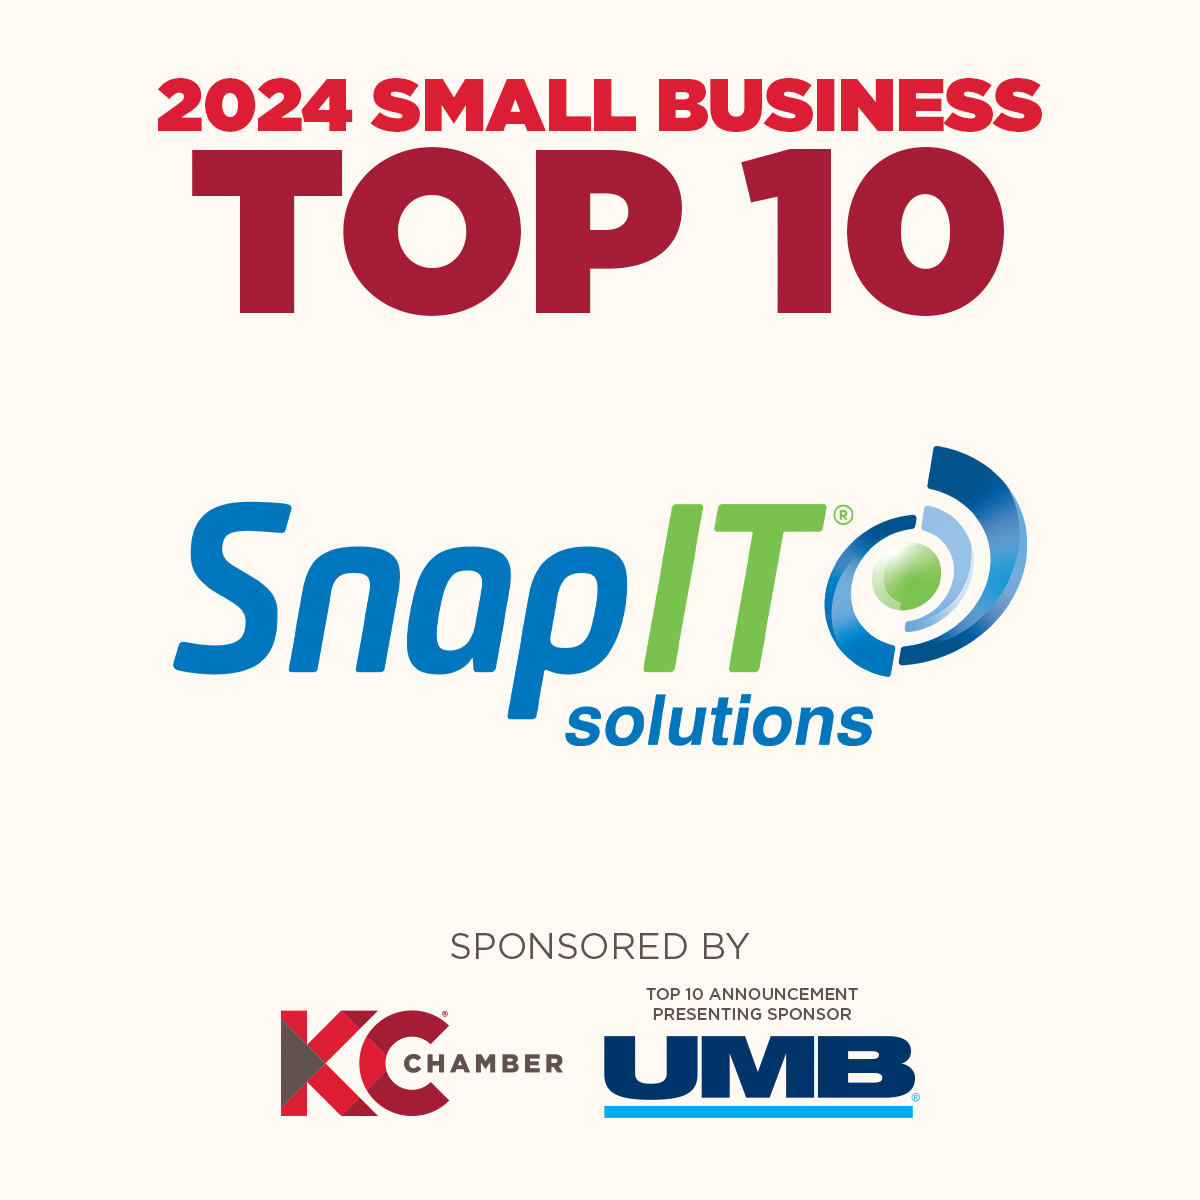 The suspense of knowing who will be announced next as a 2024 Top 10 Small Business is about to end. Congratulations to @SnapitSolution on this recognition! #CelebrateSmallBiz